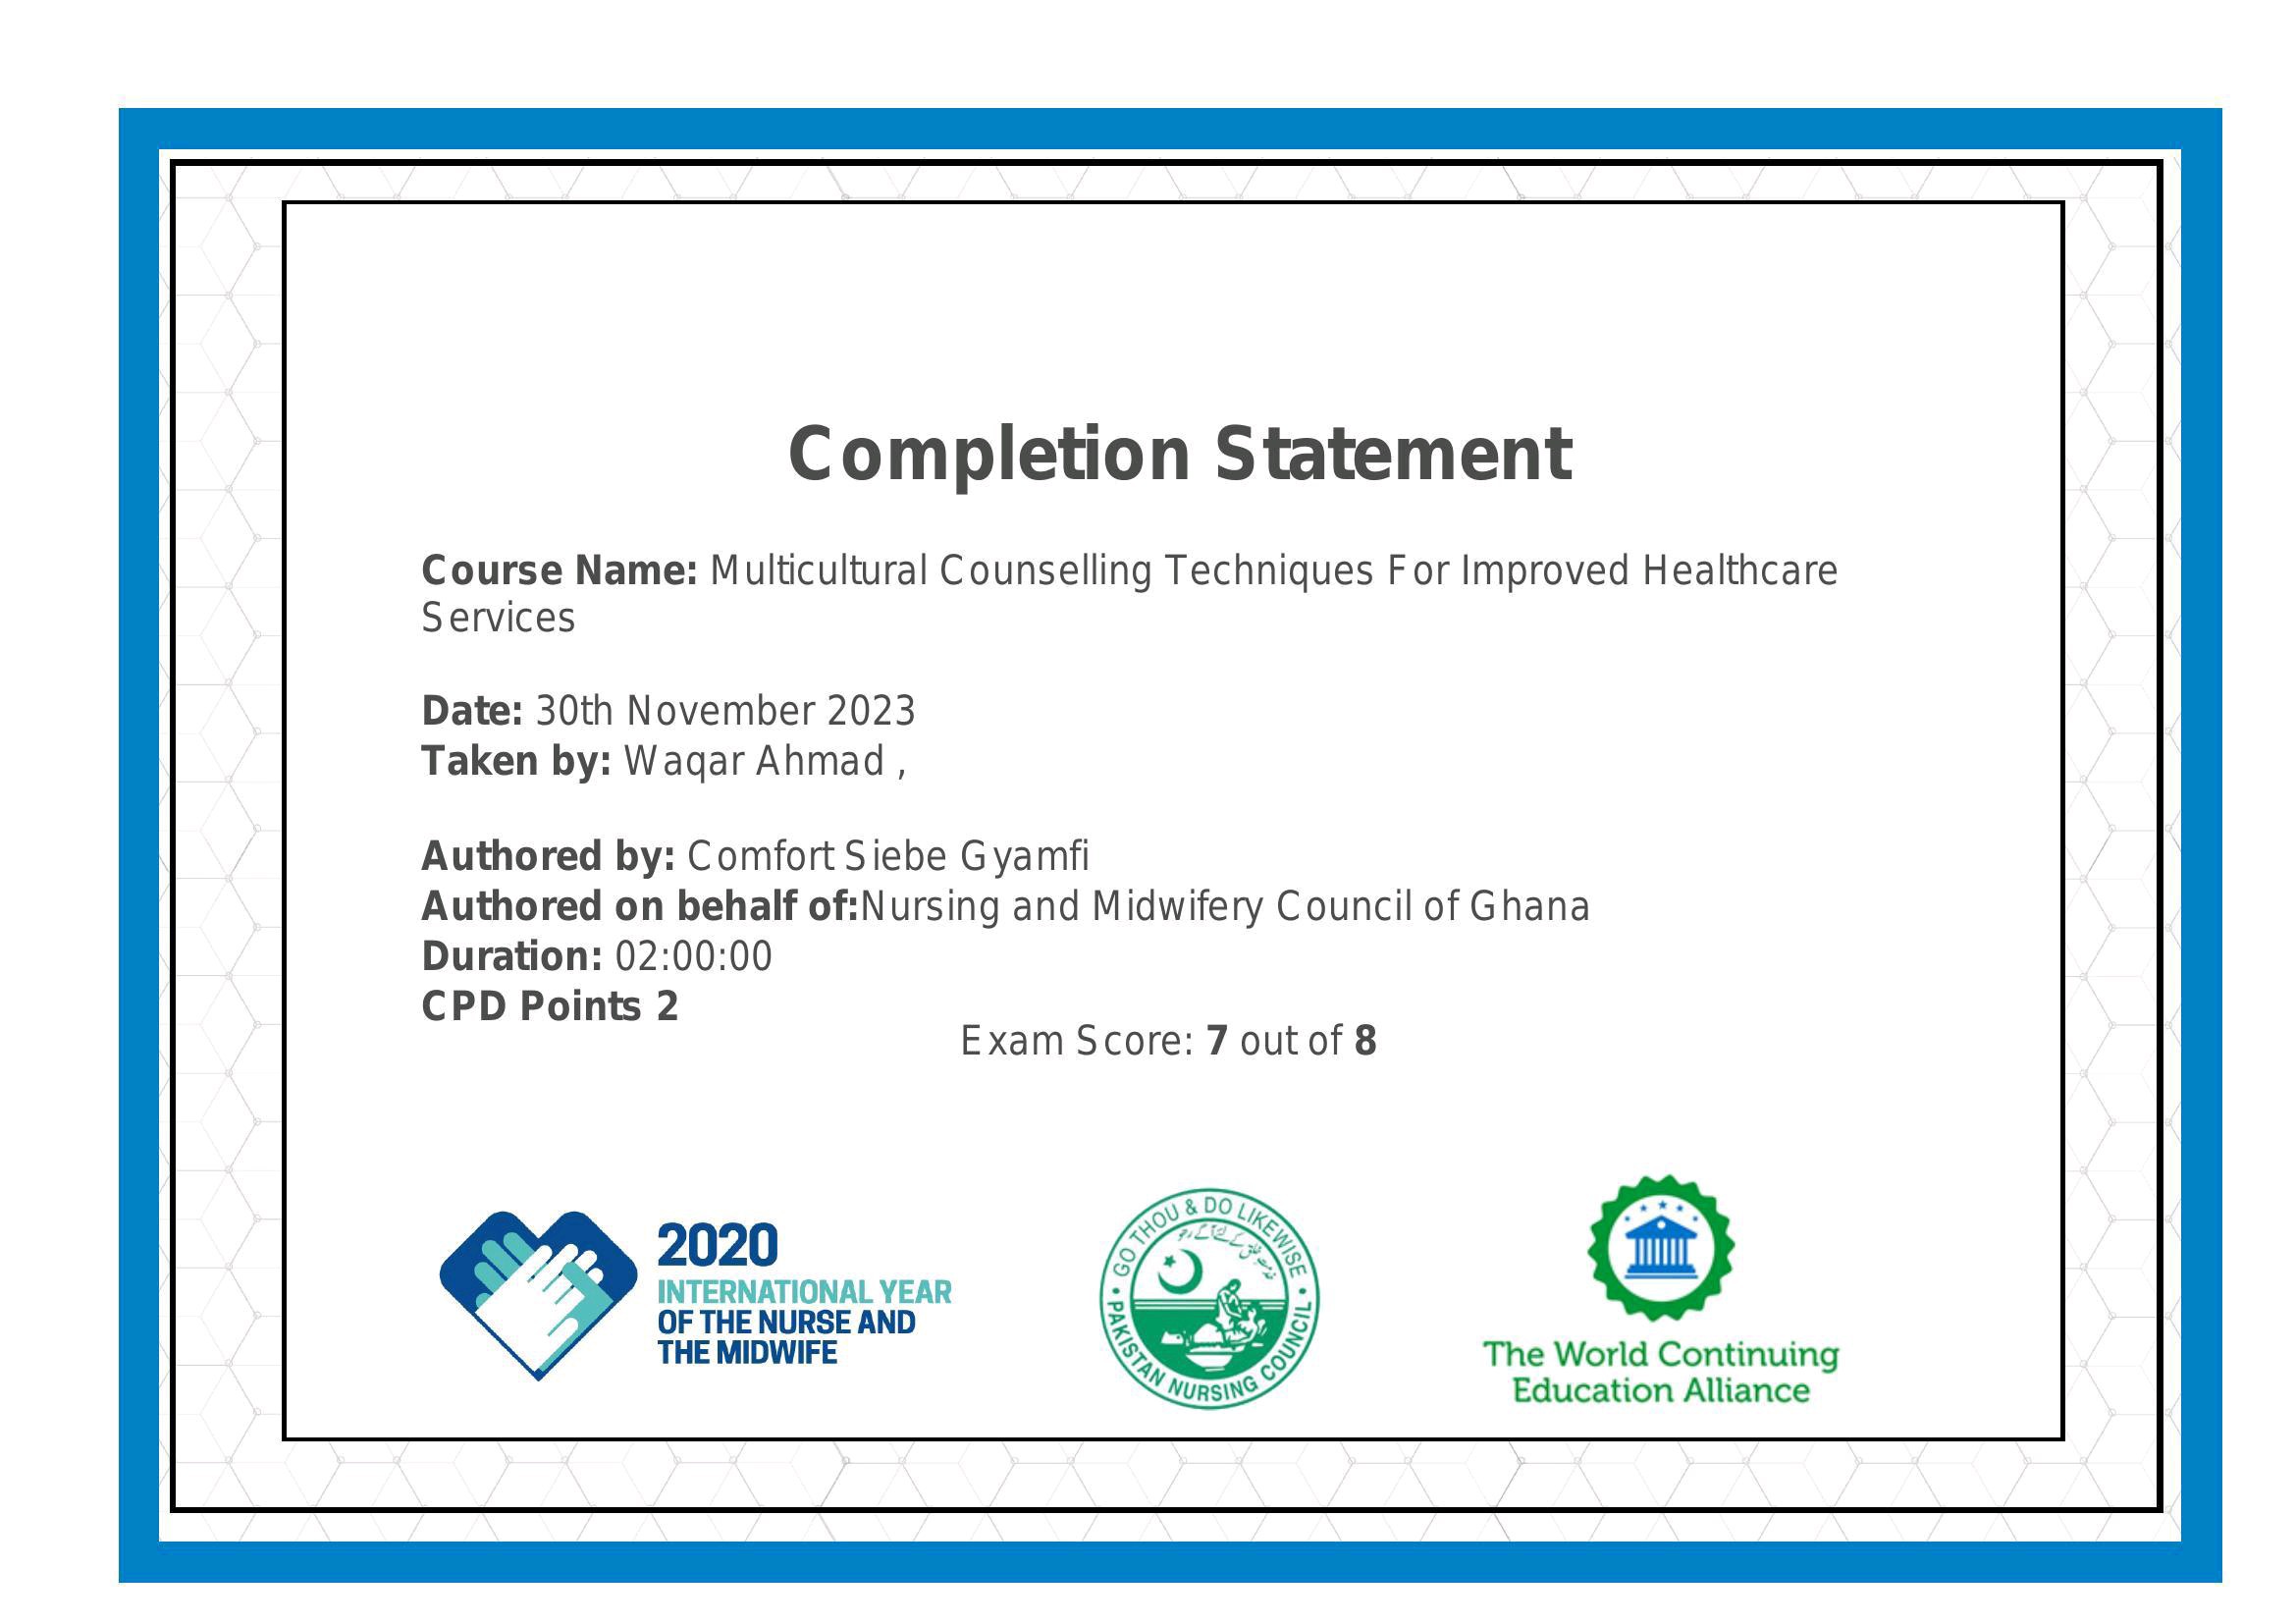 Completion Statement

Course Name: Multicultural Counselling Techniques For Improved Healthcare
Services

Date: 30th November 2023
Taken by: Wagar Ahmad ,

Authored by: Comfort Siebe Gyamfi
Authored on behalf of:Nursing and Midwifery Council of Ghana
Duration: 02:00:00

CPD Points 2
Exam Score: 7 out of 8

INTERNATIONAL YEAR :

OF THE NURSE AND Ry

THE MIDWIFE : The World Continuing
Education Alliance